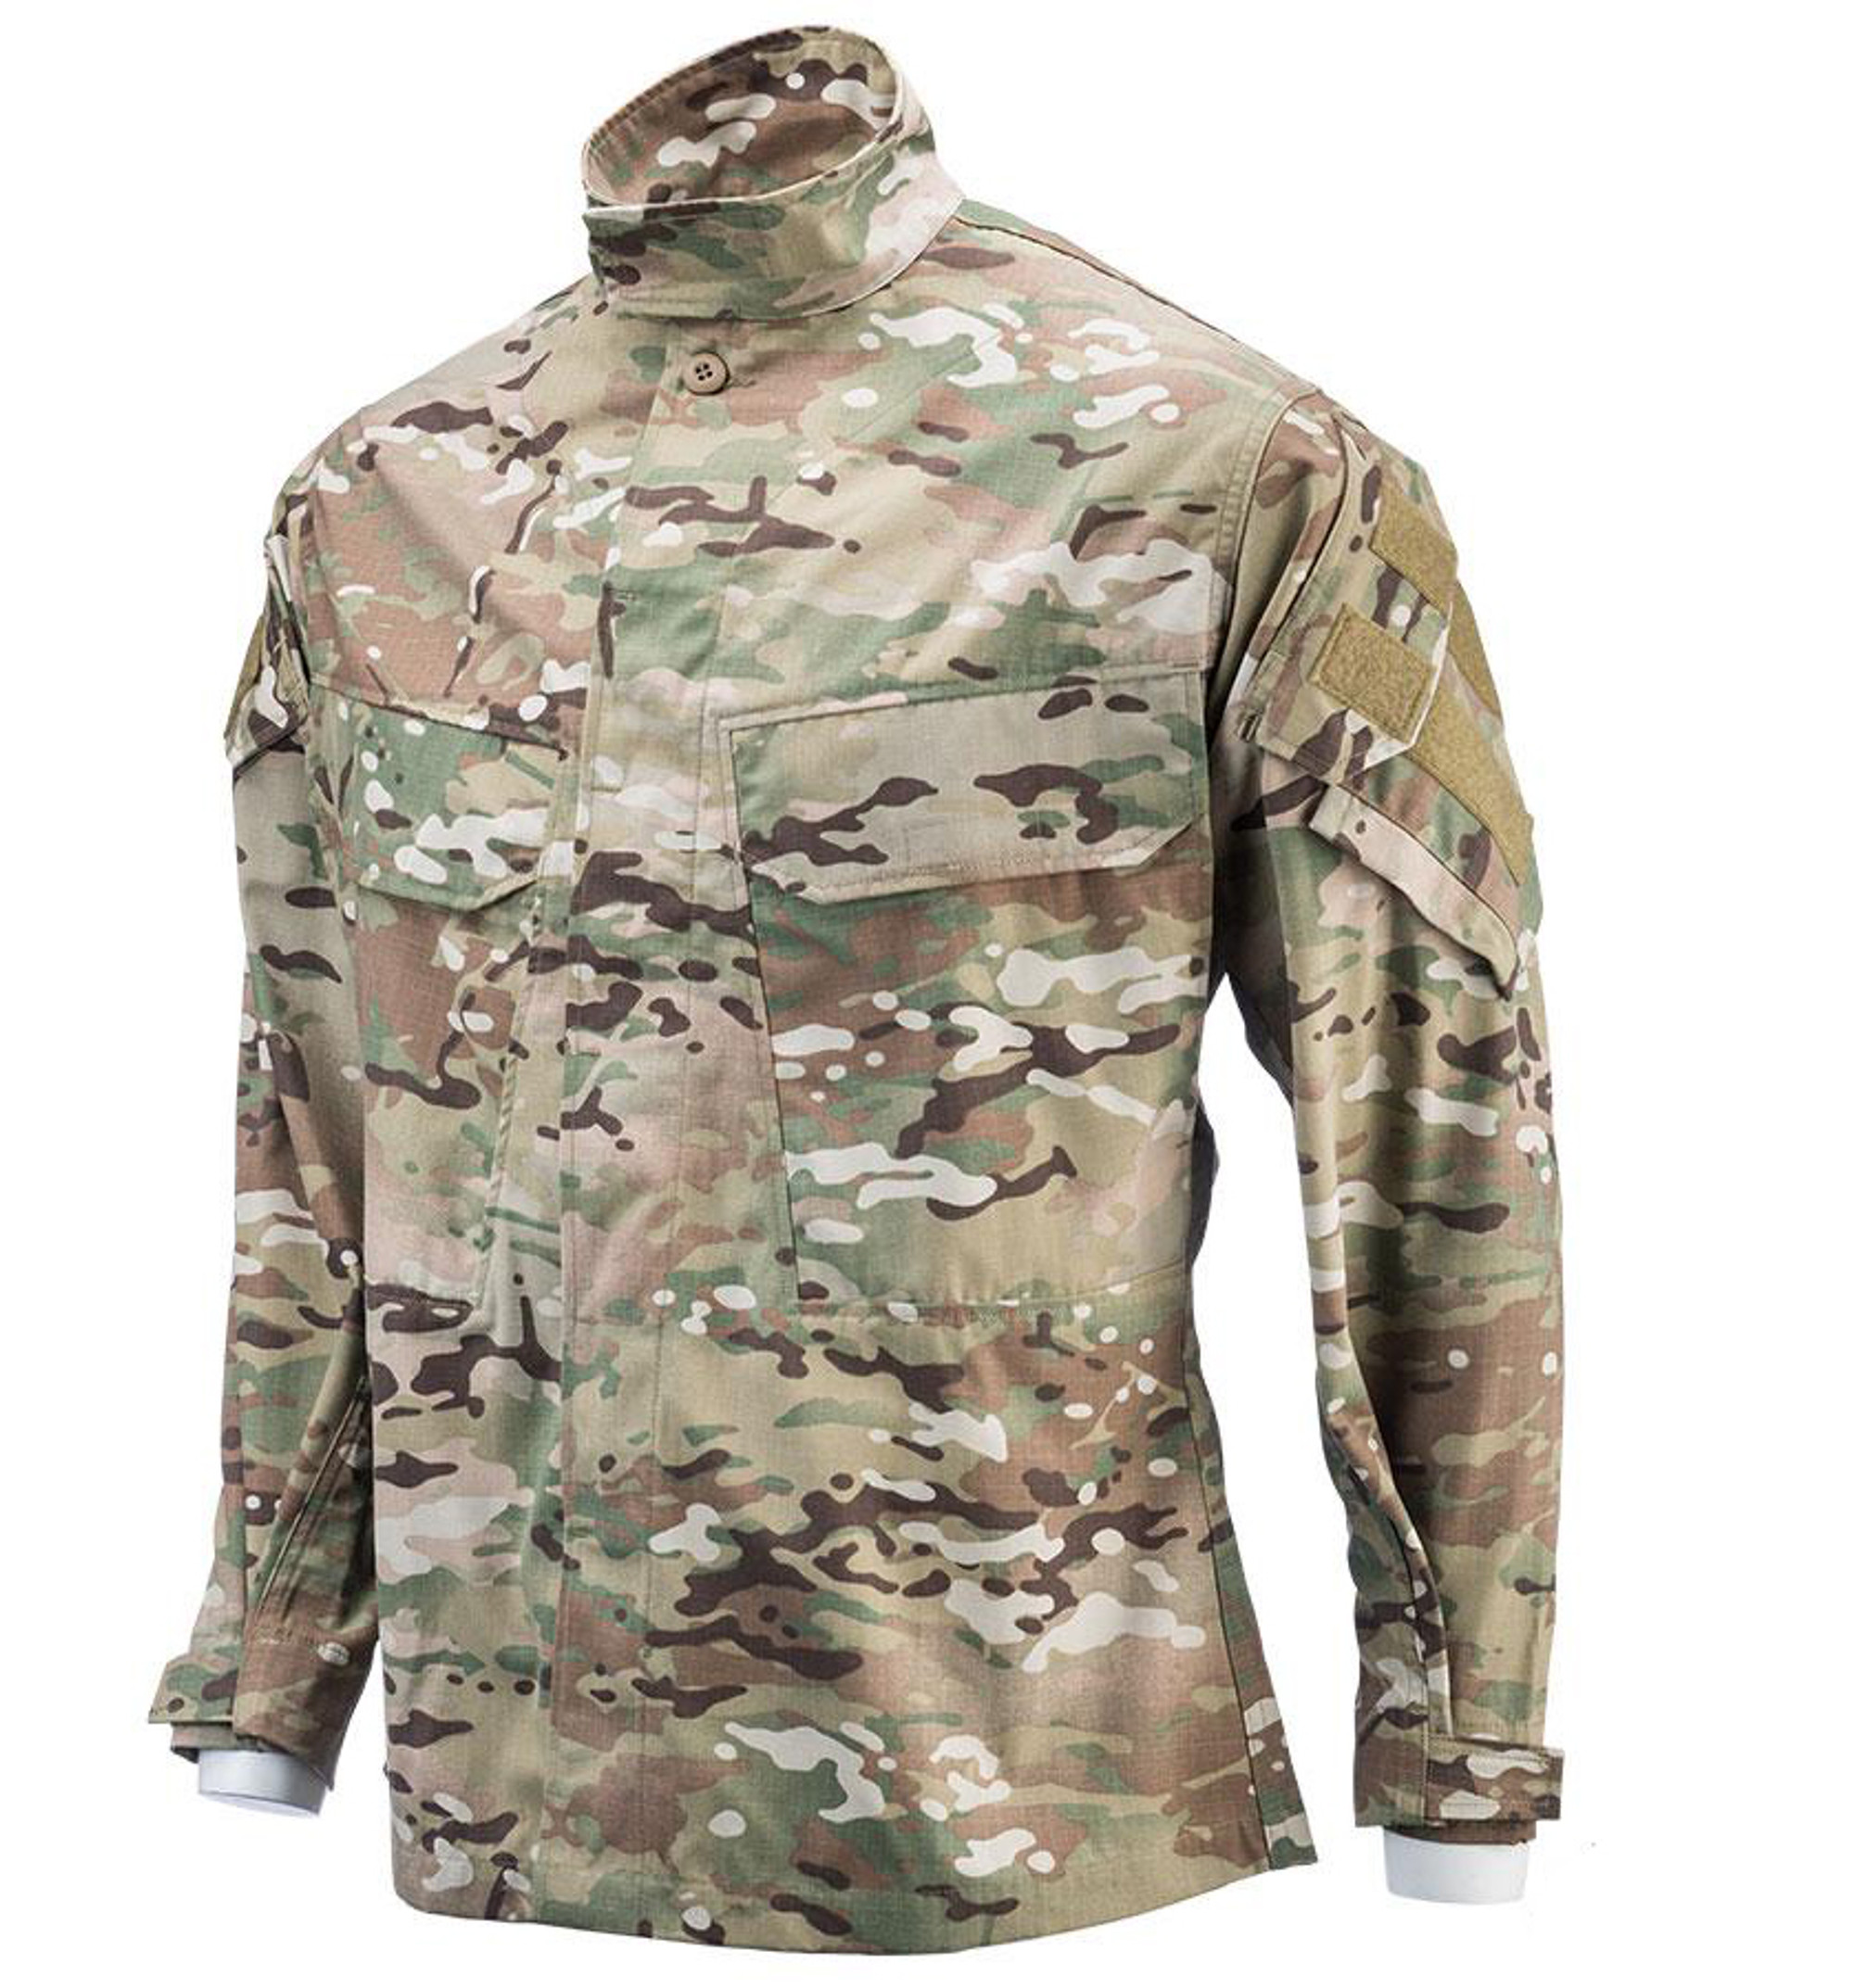 Crye Precision G3 Field Shirt (Color: Multicam)